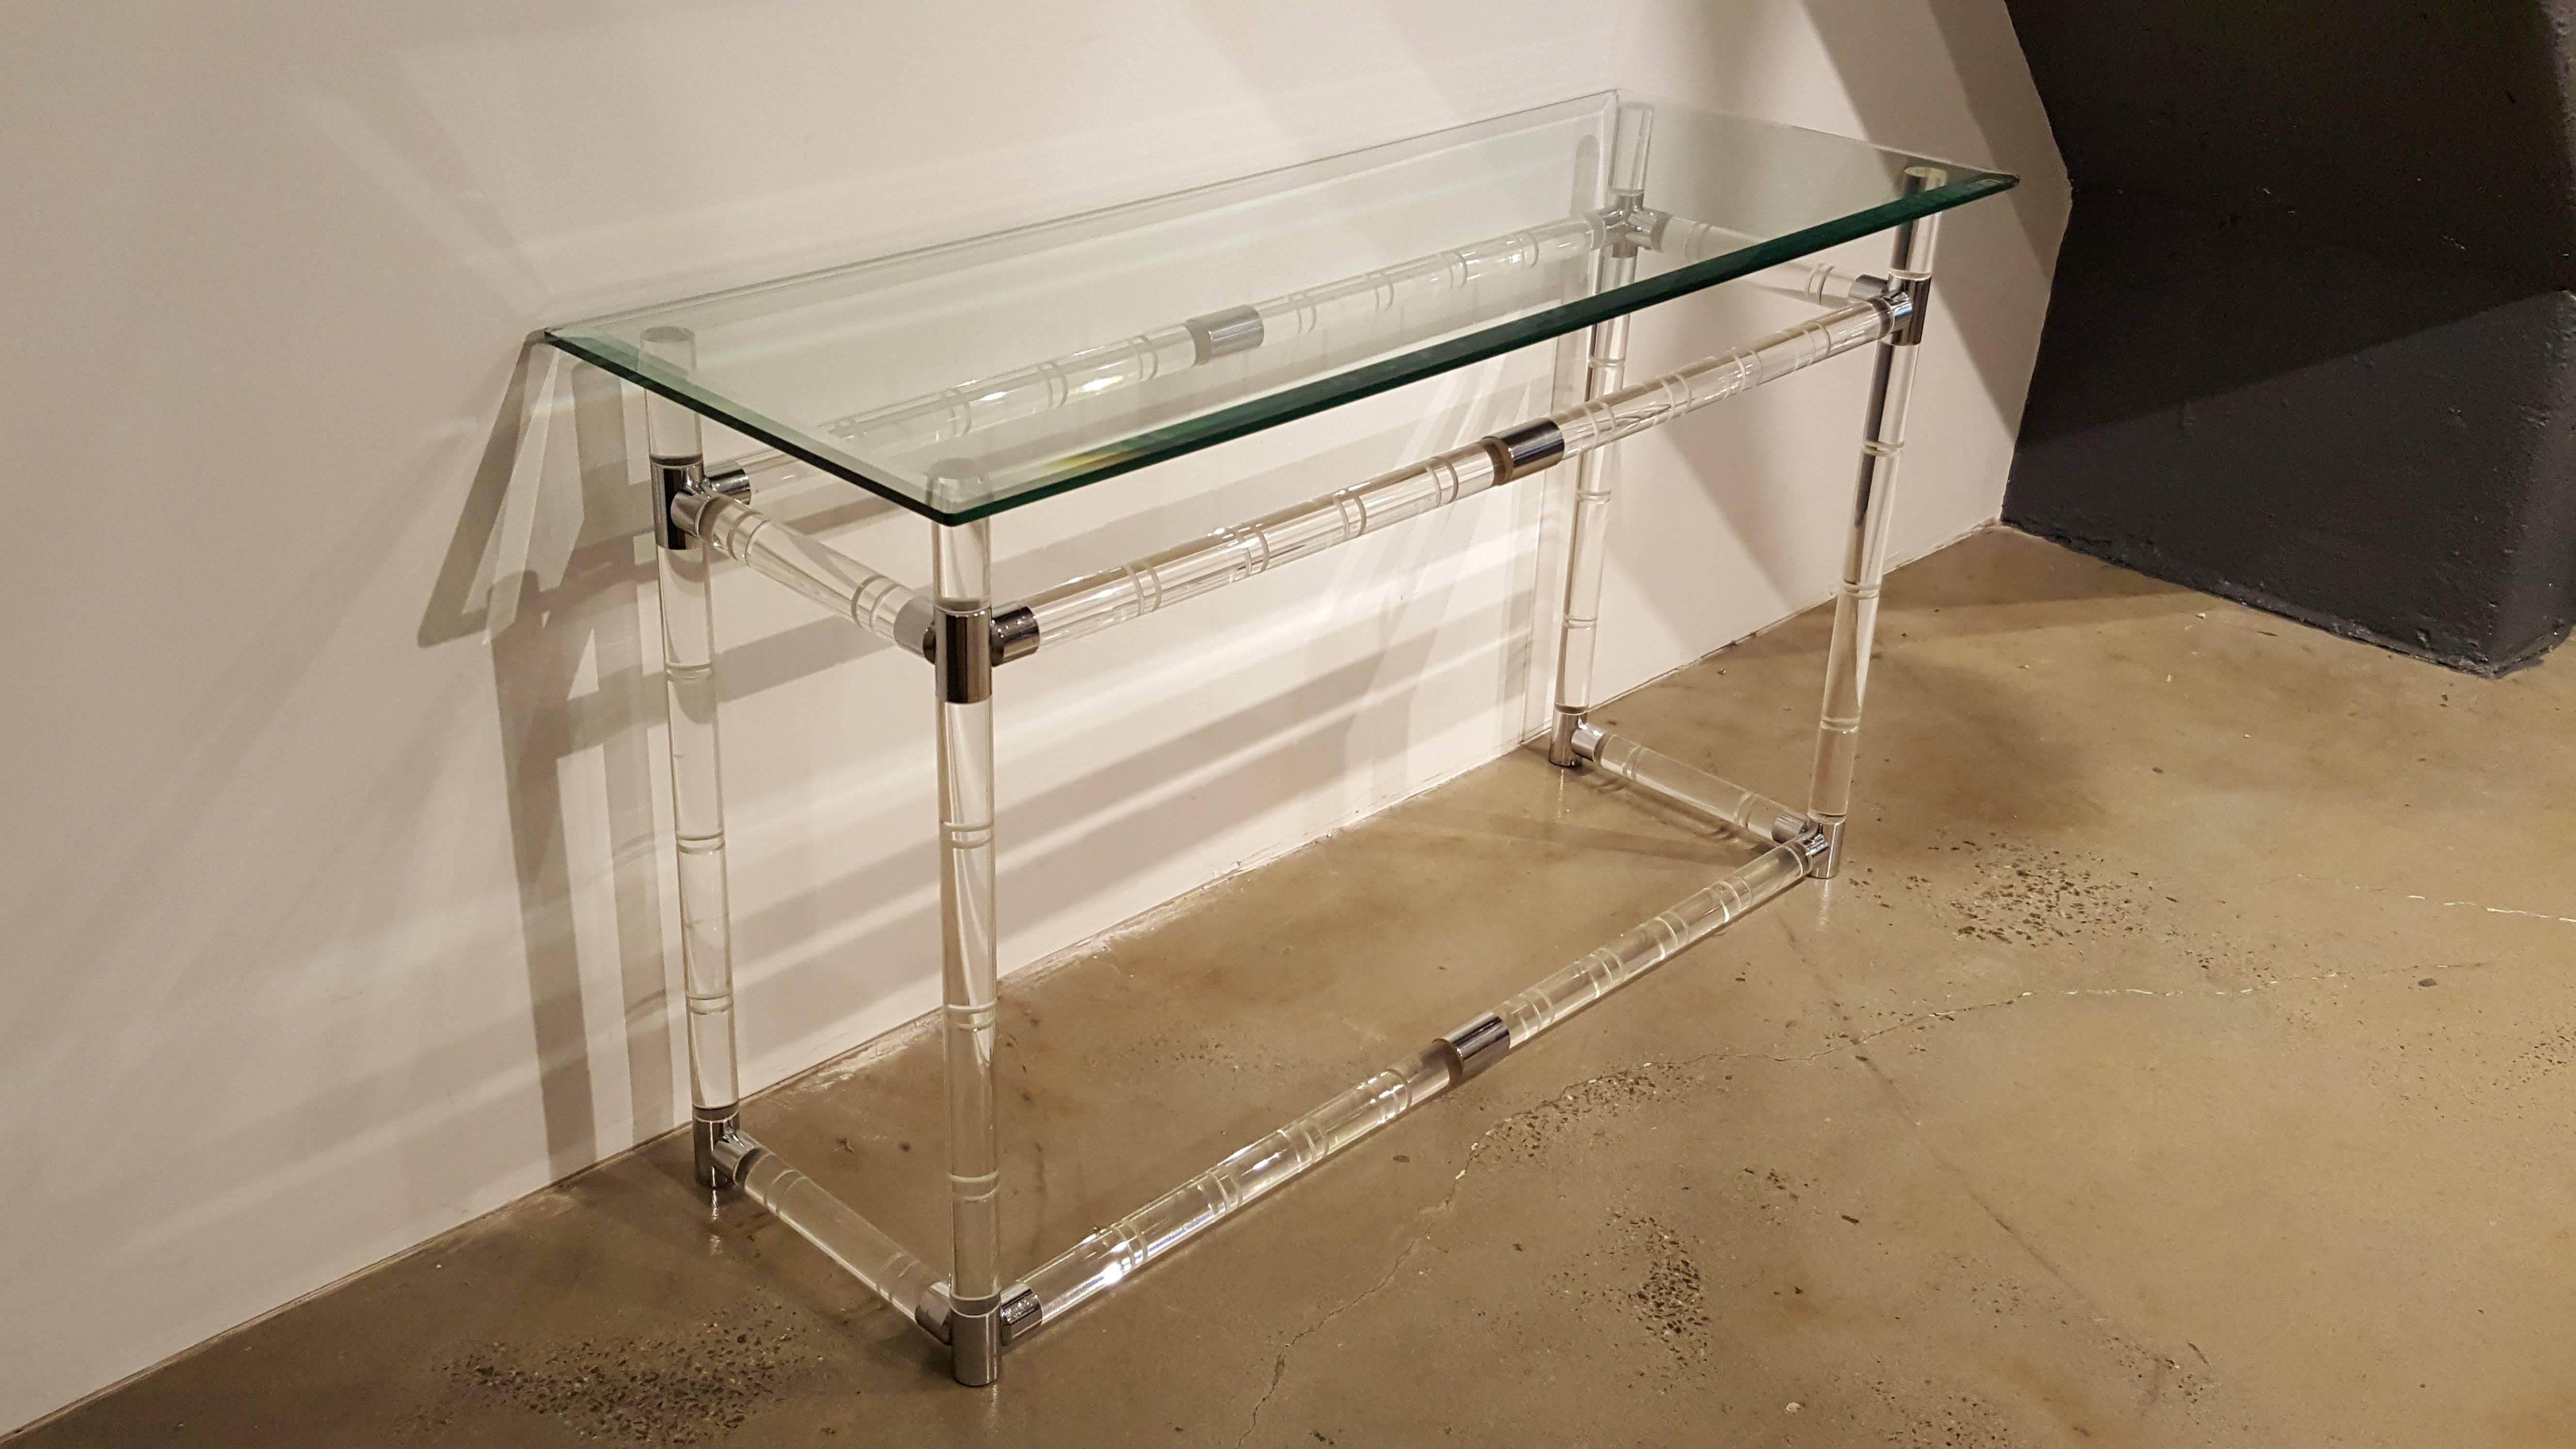 Striking console table in Lucite, glass and chrome or polished nickel from the iconic Bamboo series by Charles Hollis Jones. Gorgeous design and a classic example of his work. Bevelled glass top is 18